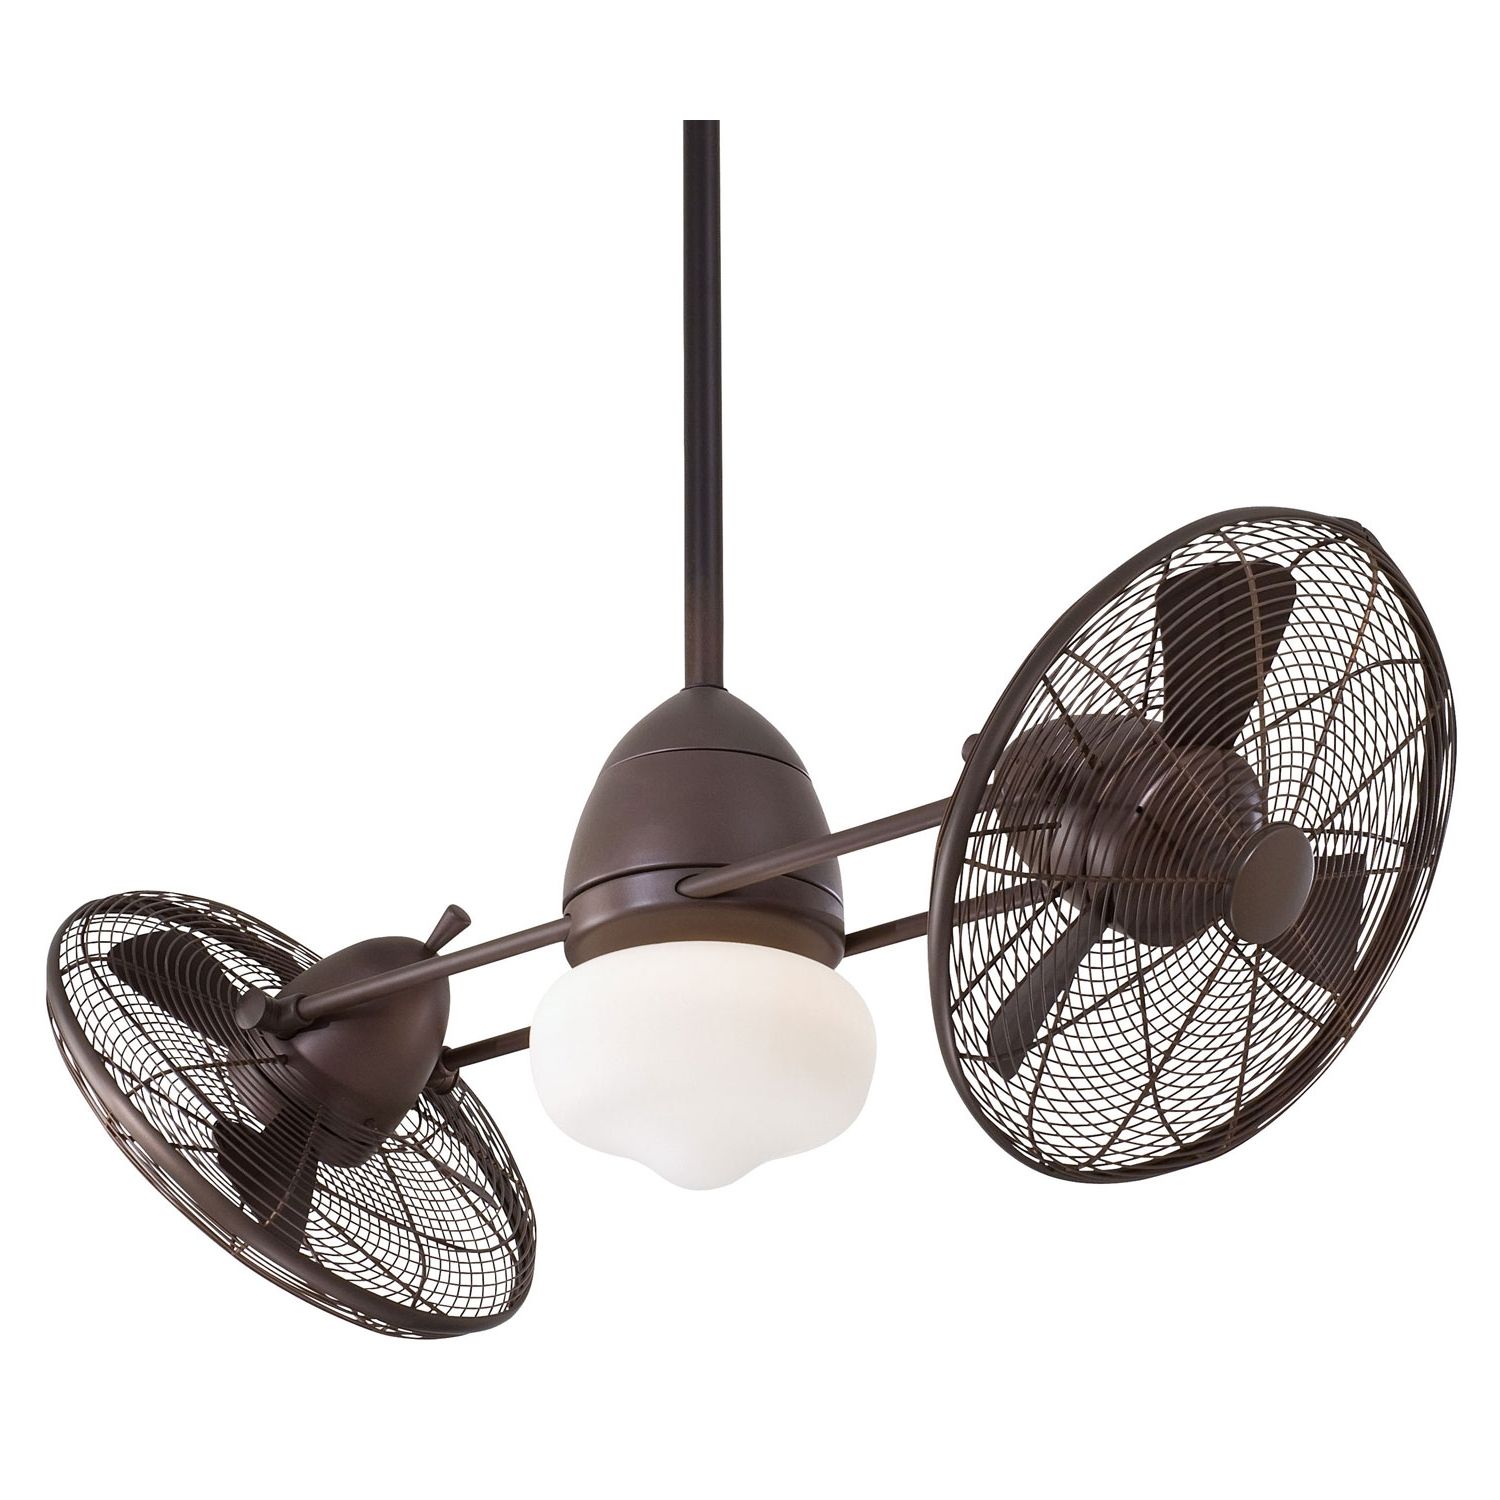 Outdoor Ceiling Fans For Gazebo Intended For Current Outdoor Ceiling Fans With Light – Outdoor Lighting Ideas (View 10 of 20)